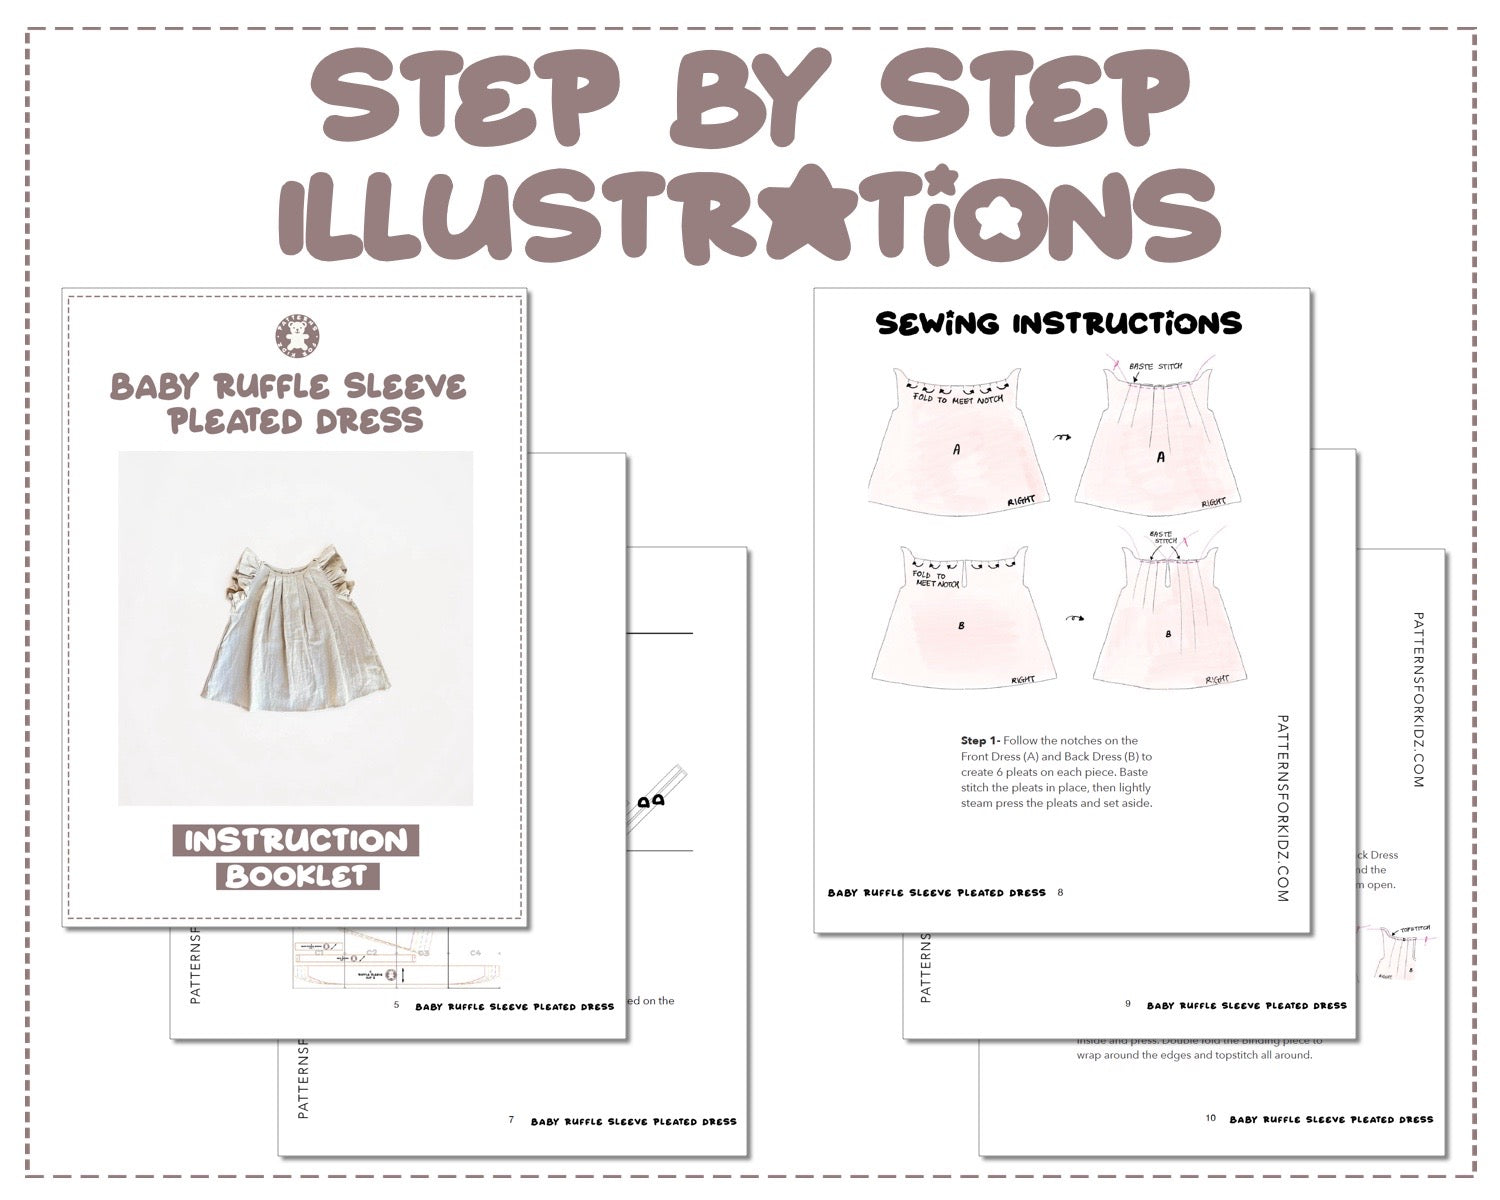 Baby Ruffle Sleeve Pleated Dress sewing pattern step by step illustrations.